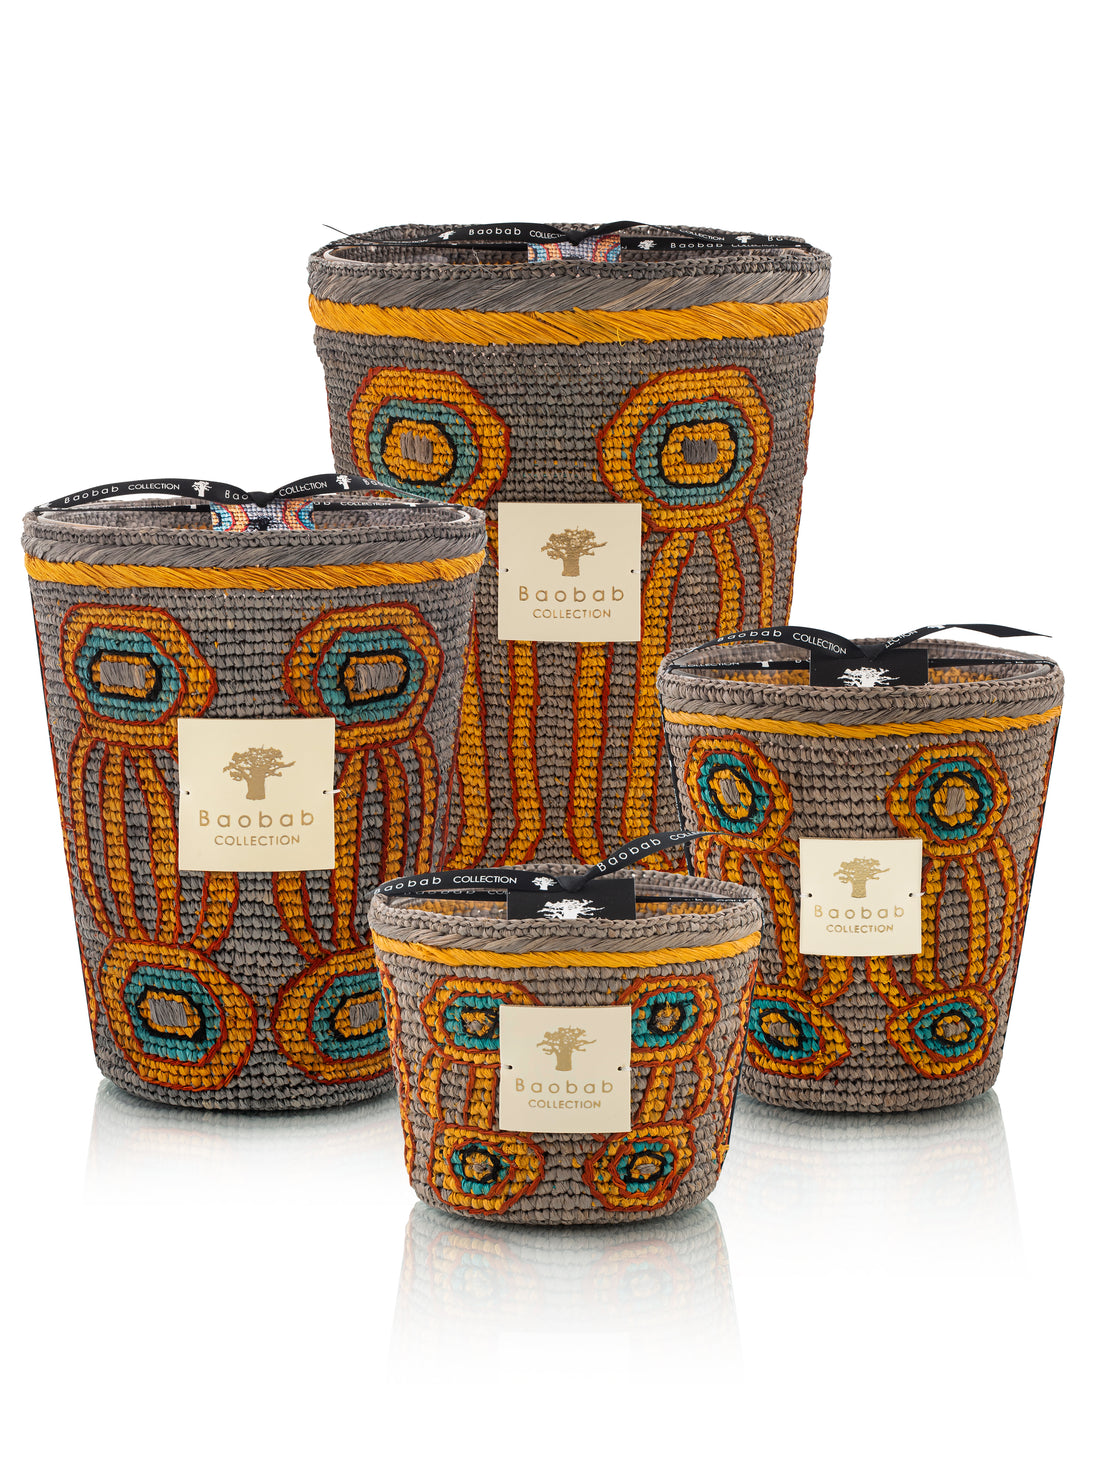 SCENTED CANDLE DOANY ANTONGONA - Baobab Collection